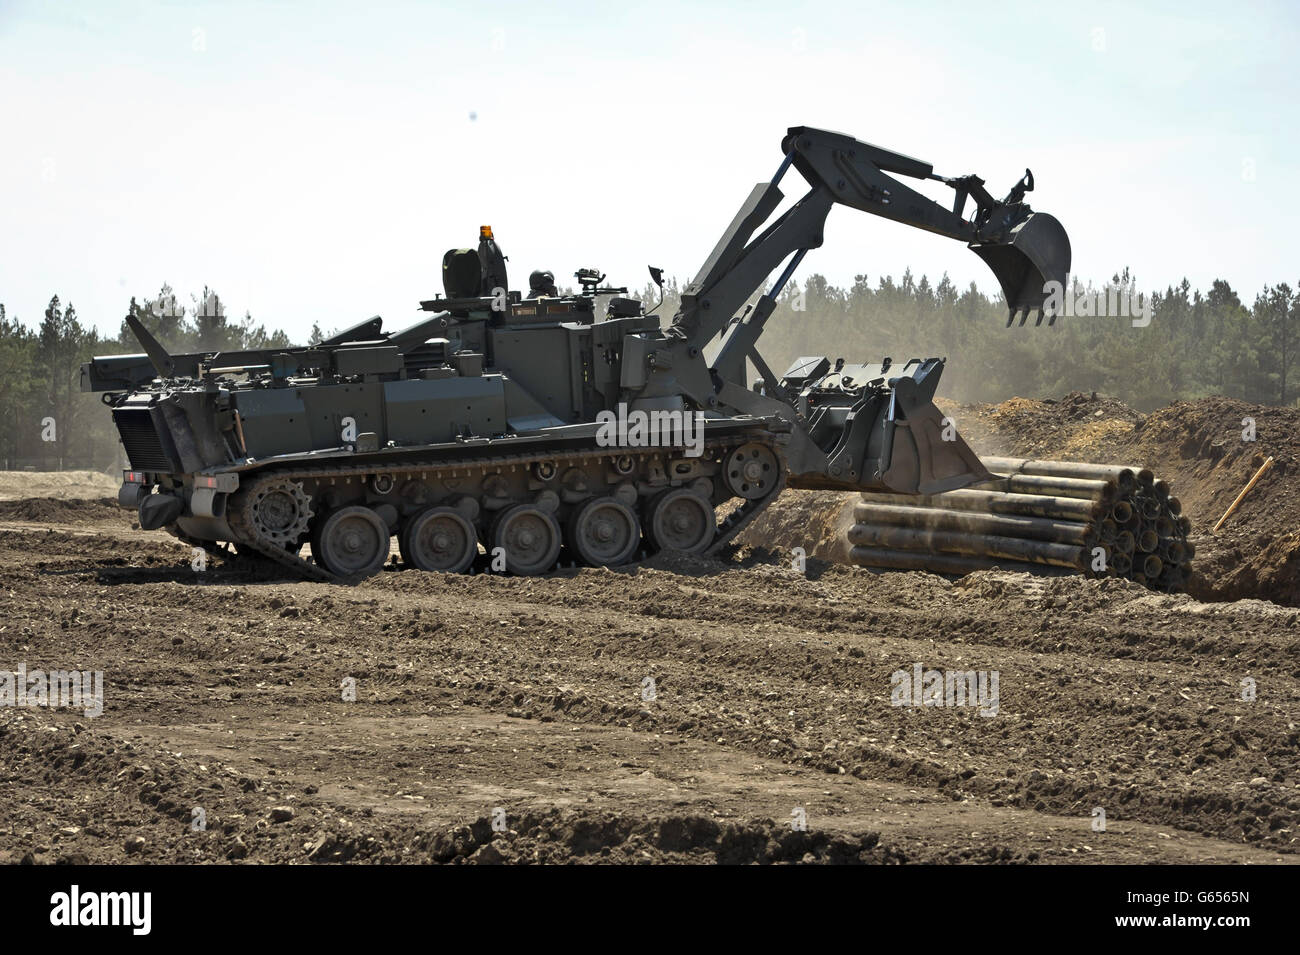 A Terrier armoured digger, which can be controlled by remote control, is driven by a soldier as it is displayed and put through its paces during an unveilling at the Defence Armoured Vehicle Centre, Bovington, Dorset. Stock Photo